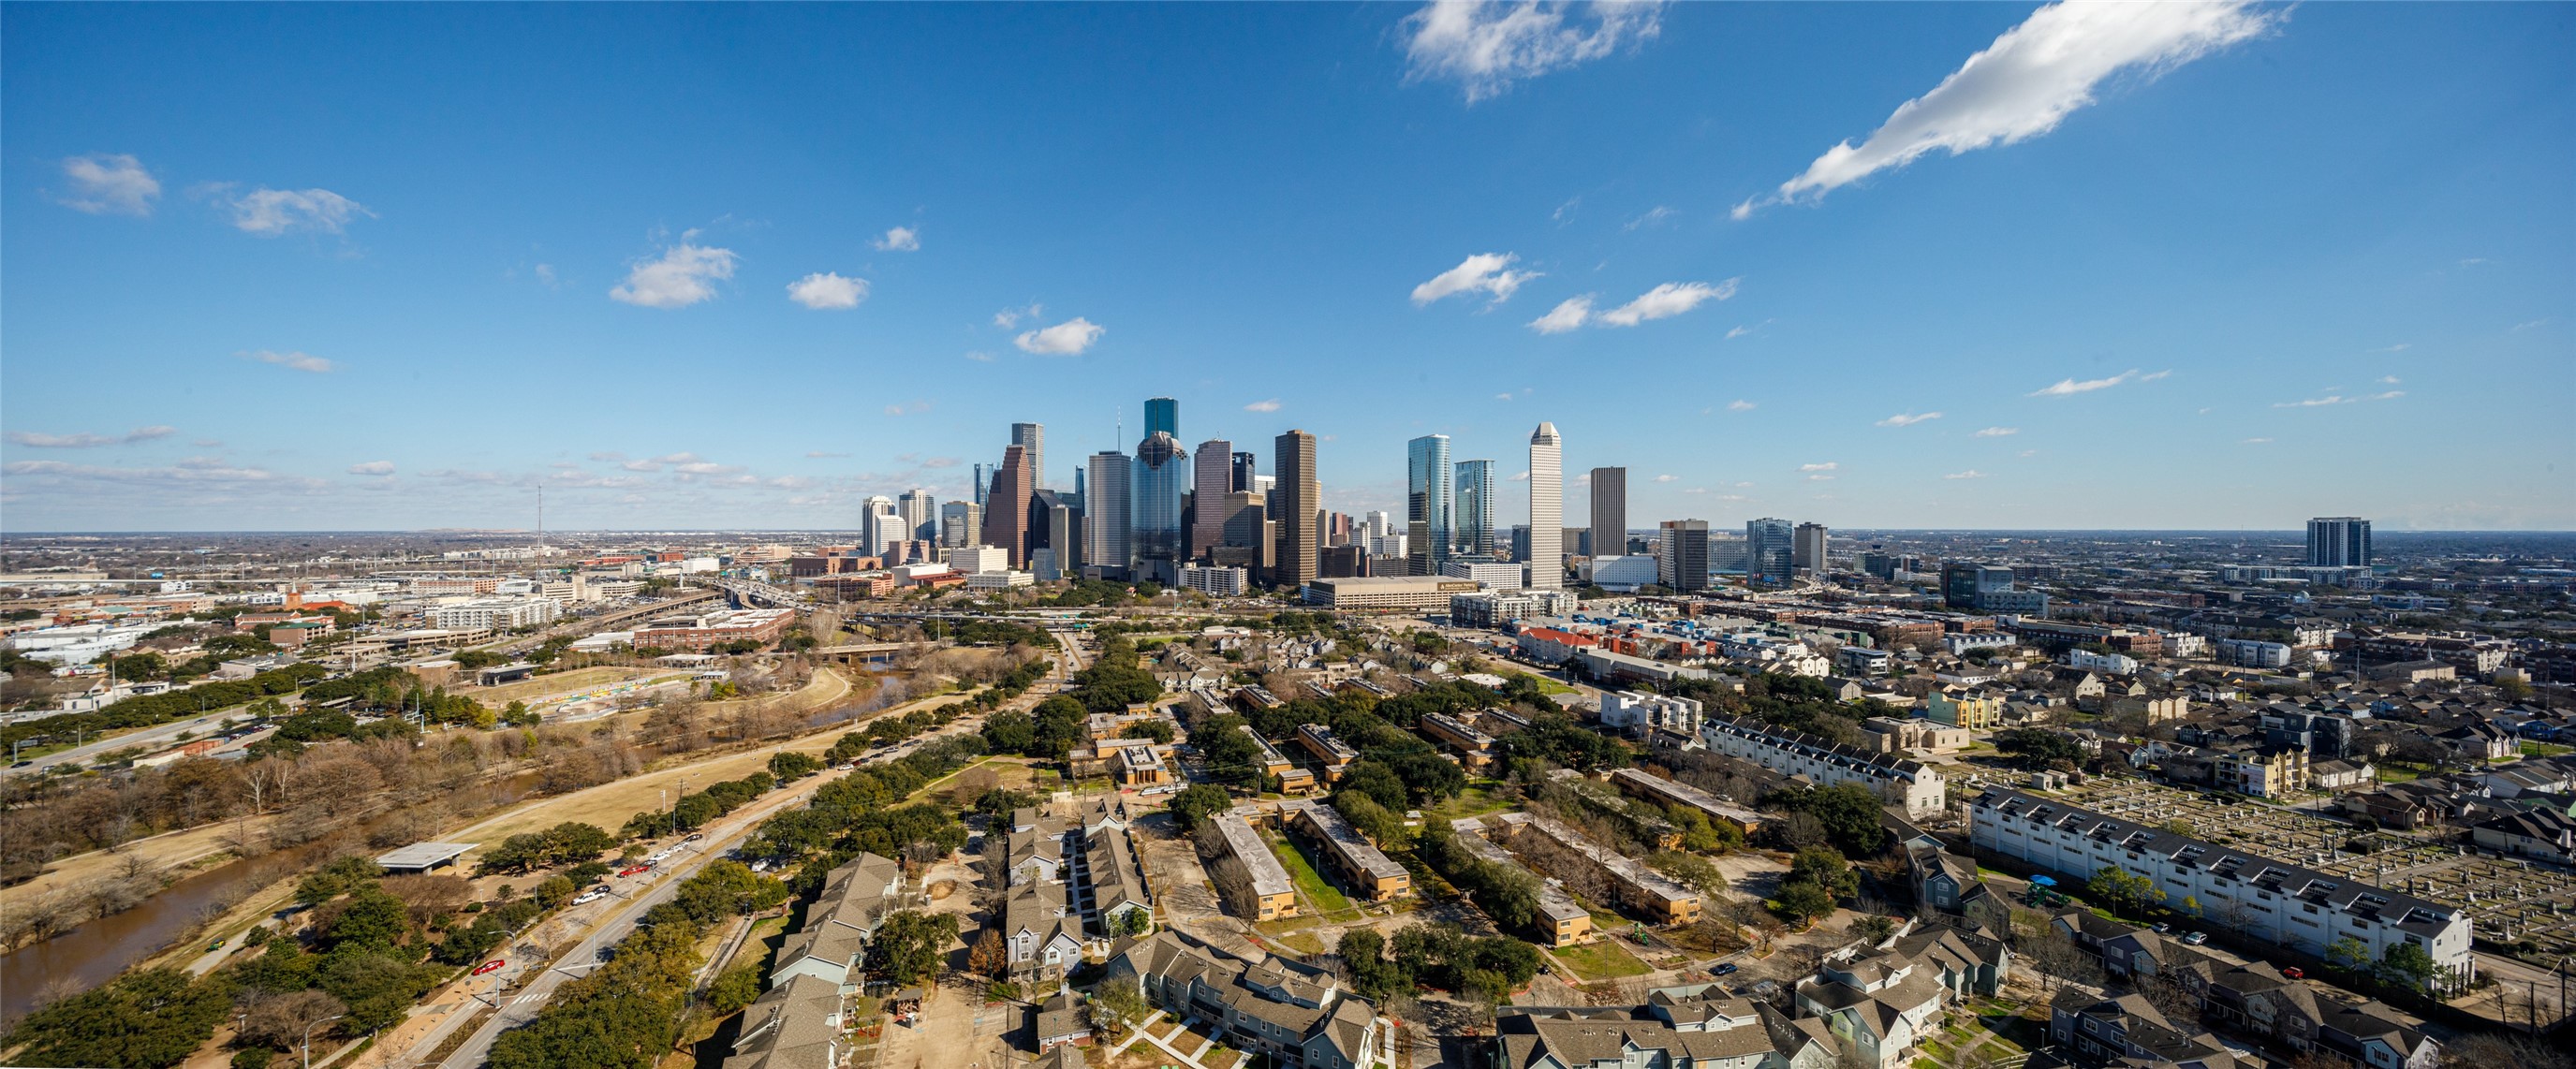 Discover the pinnacle of luxury living in this 2-bedroom. Enjoy sweeping views of the Downtown  Houston from floor-to-ceiling windows. With spacious bedrooms and a private balcony, indulge in a sophisticated lifestyle surrounded by breathtaking panoramas of Houston's vibrant cityscape.